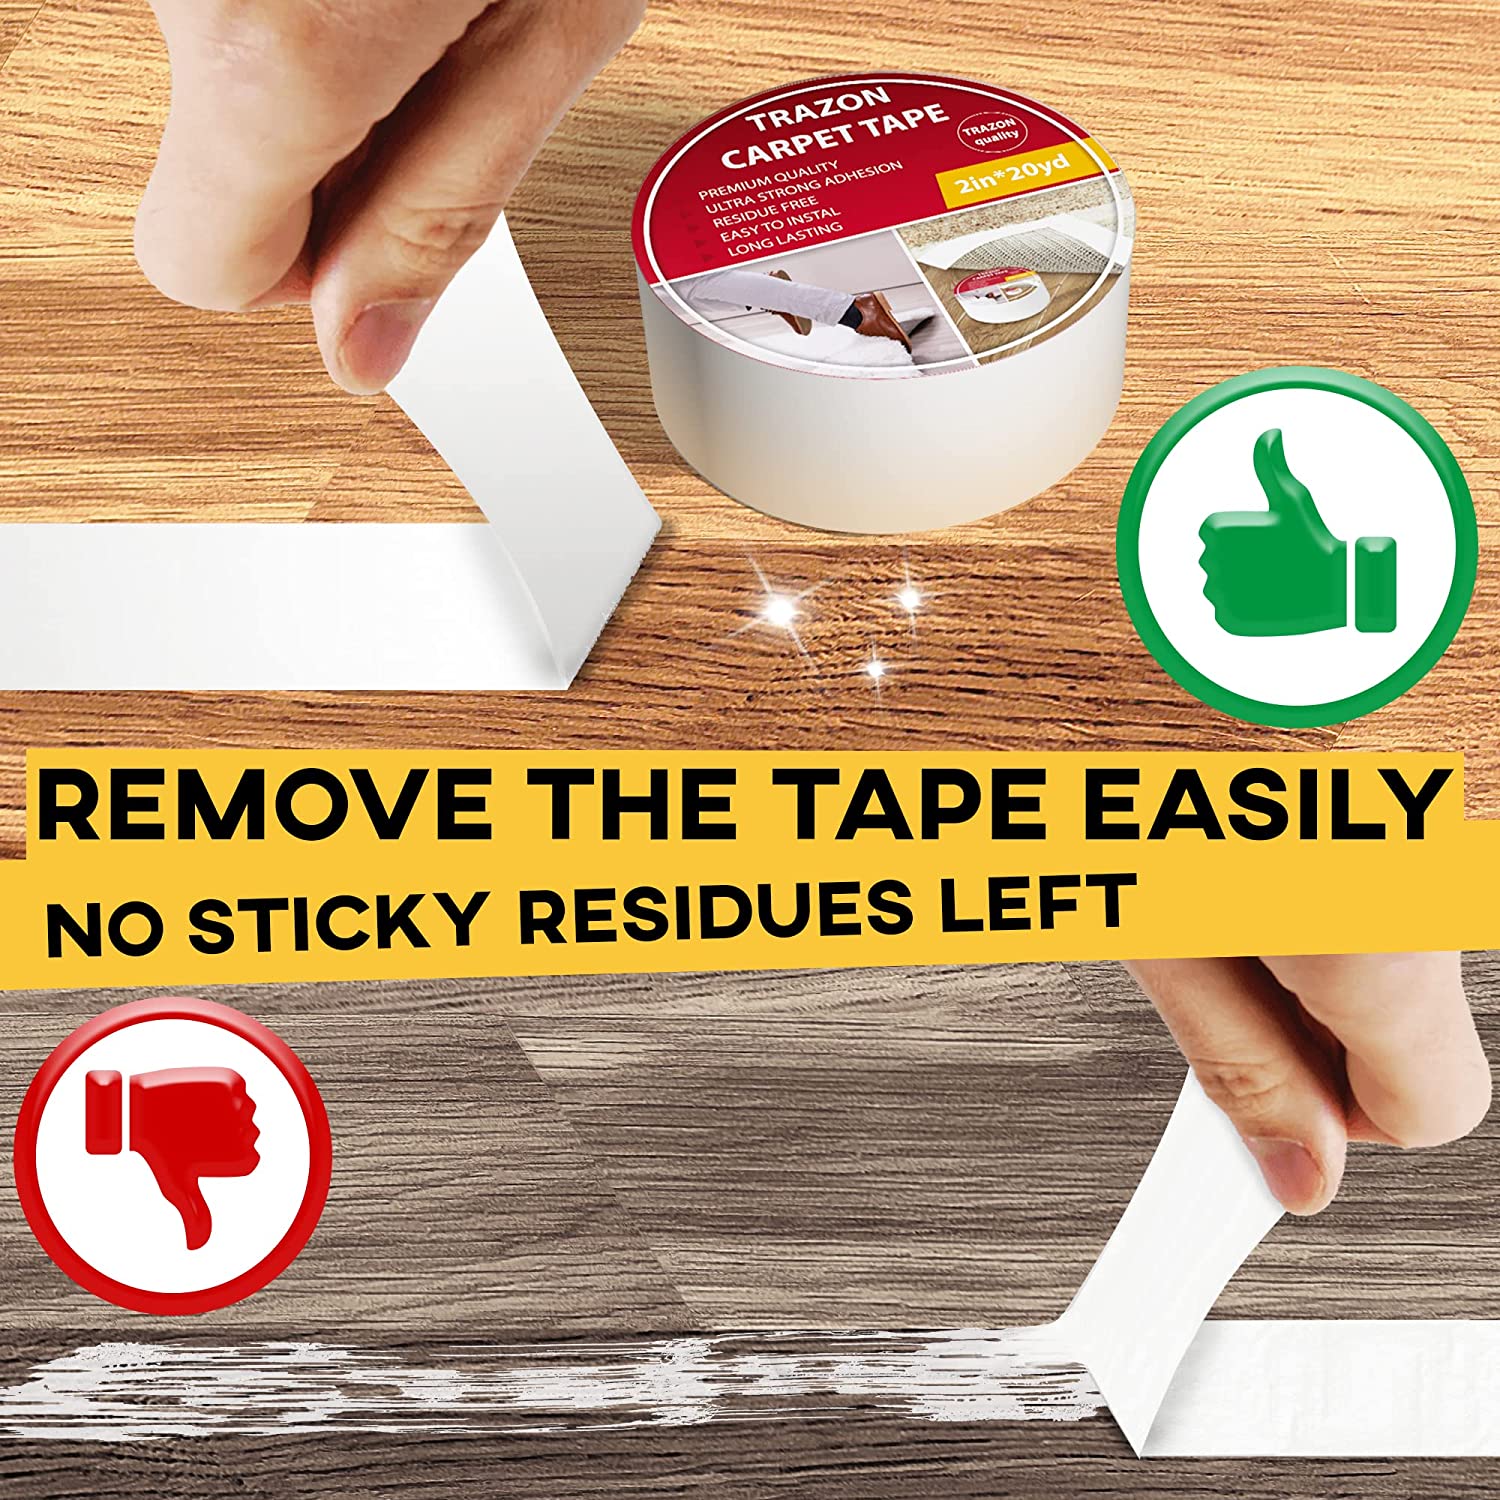 Trazon Carpet Tape Double Sided - Rug Tape Grippers for Hardwood